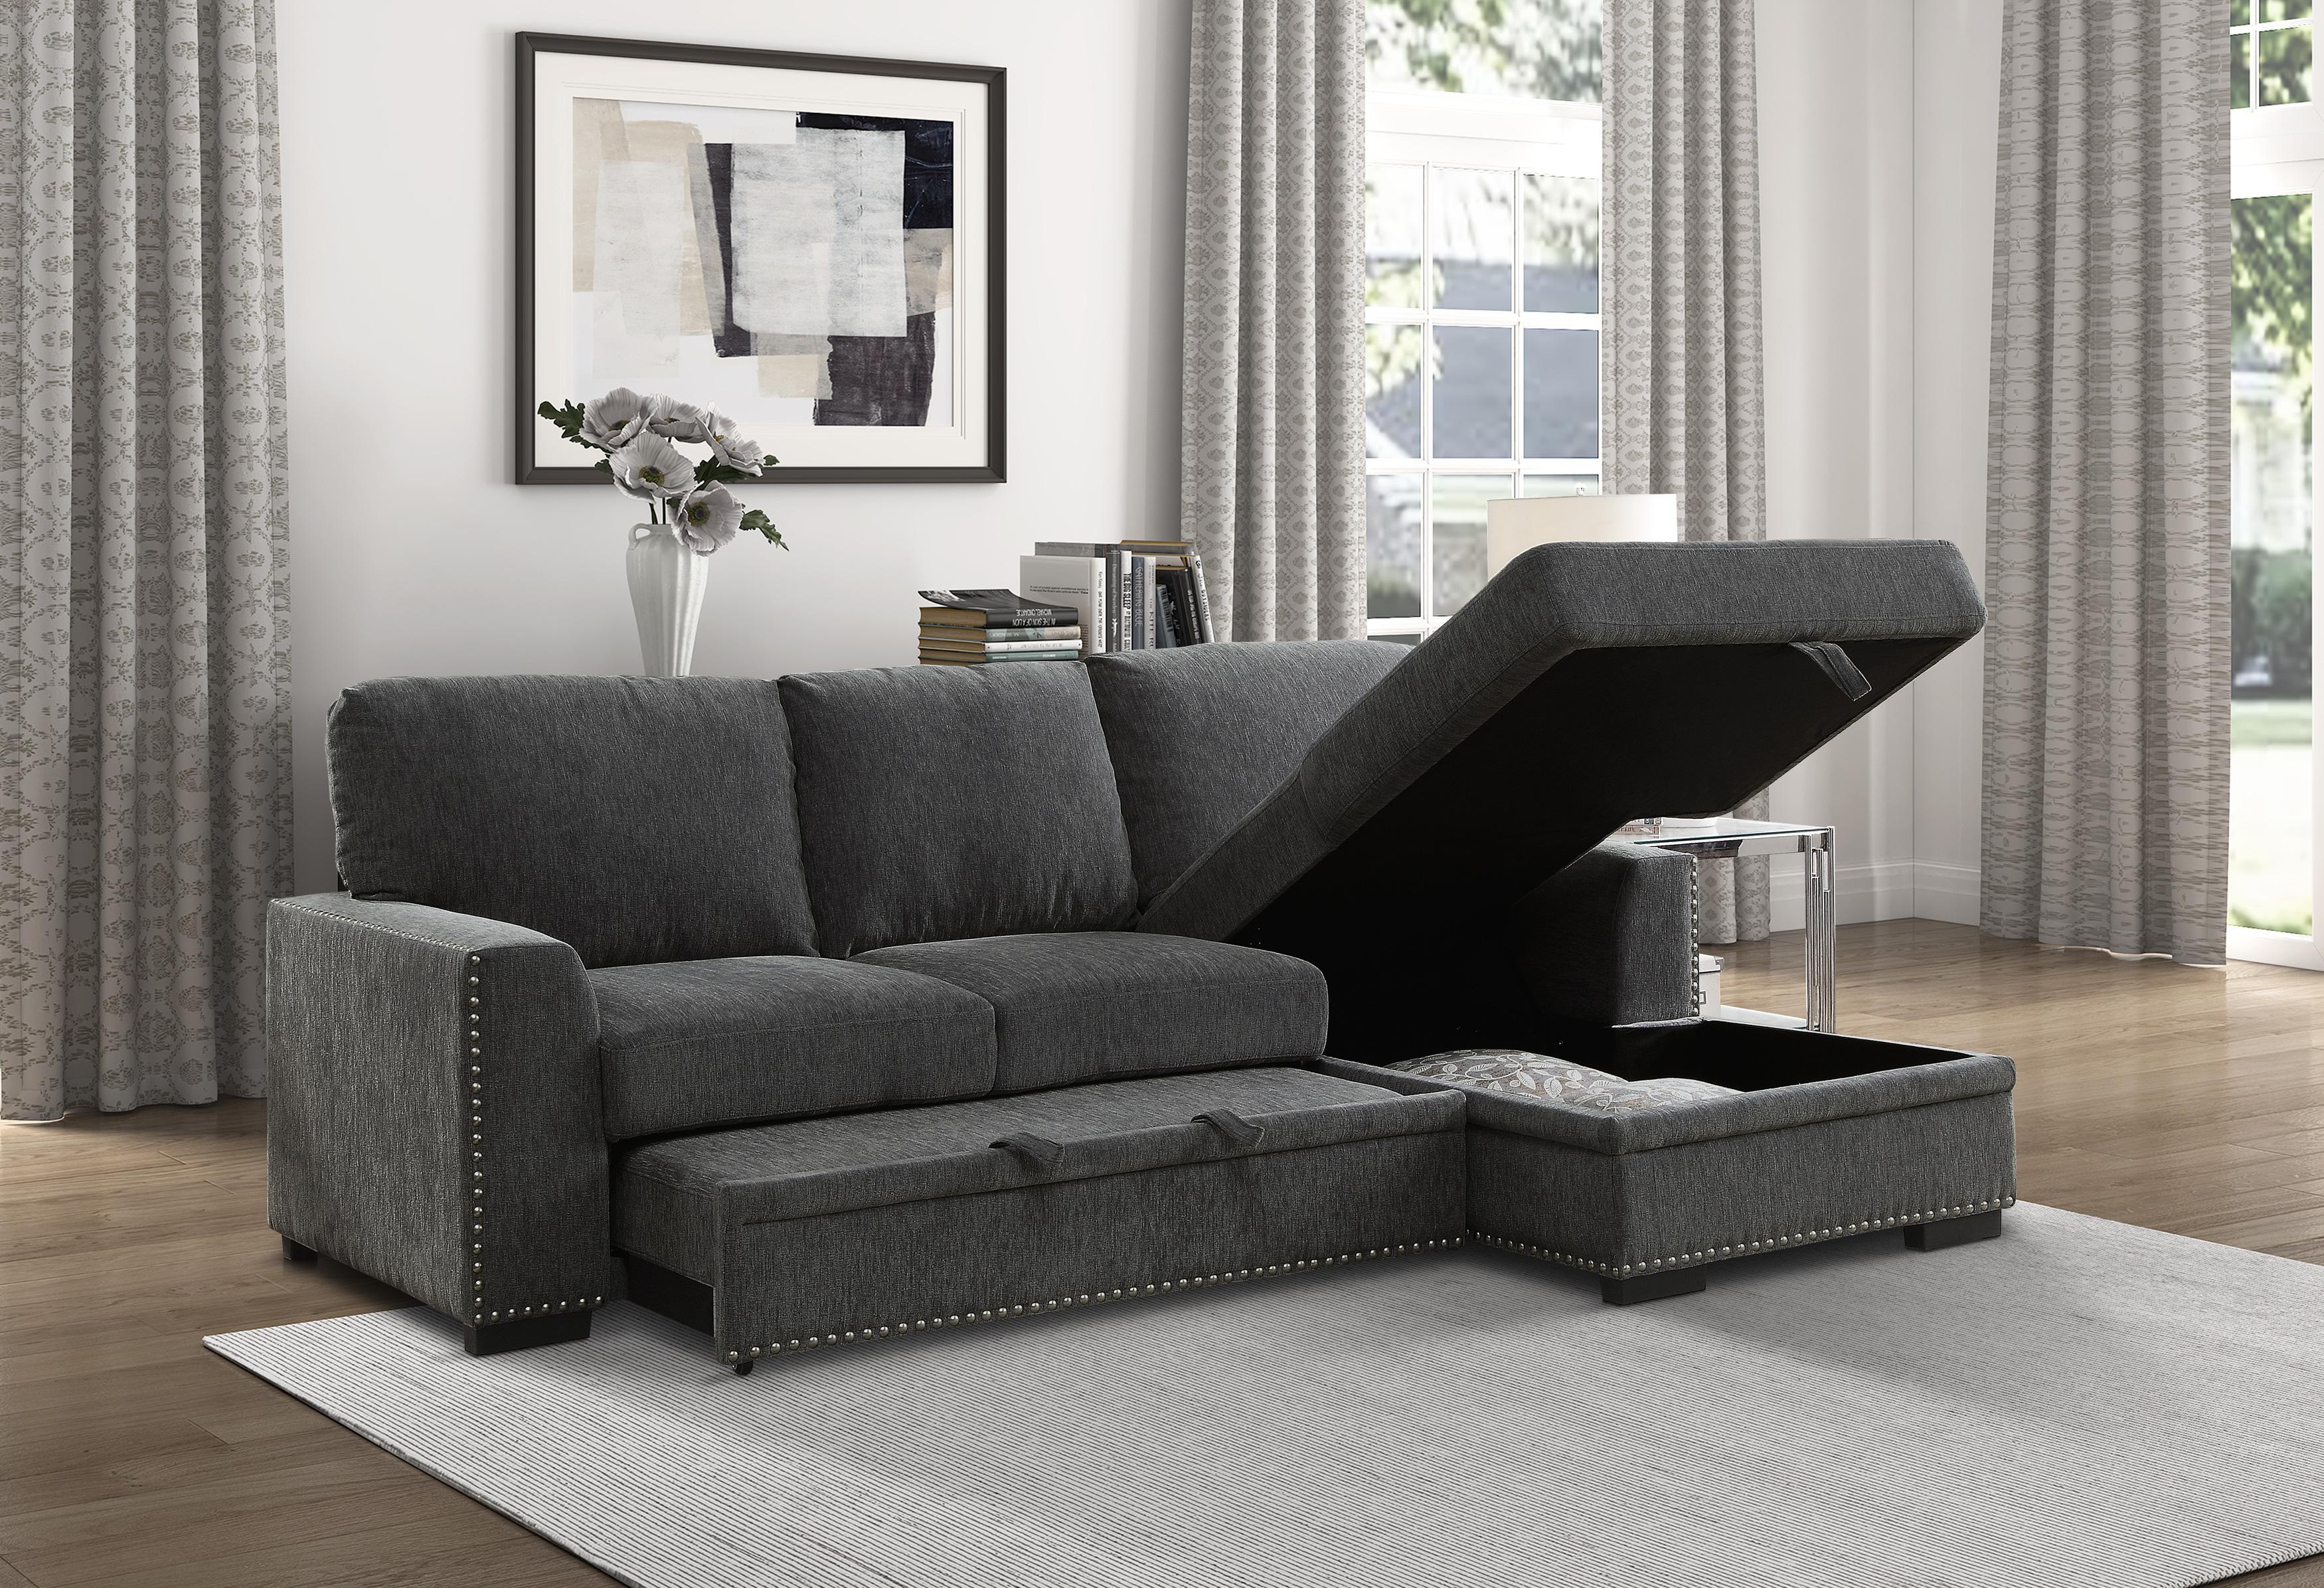 

    
 Order  Modern Charcoal Solid Wood RHC 2-Piece Sectional Homelegance 9468CC*2RC2L Morelia
